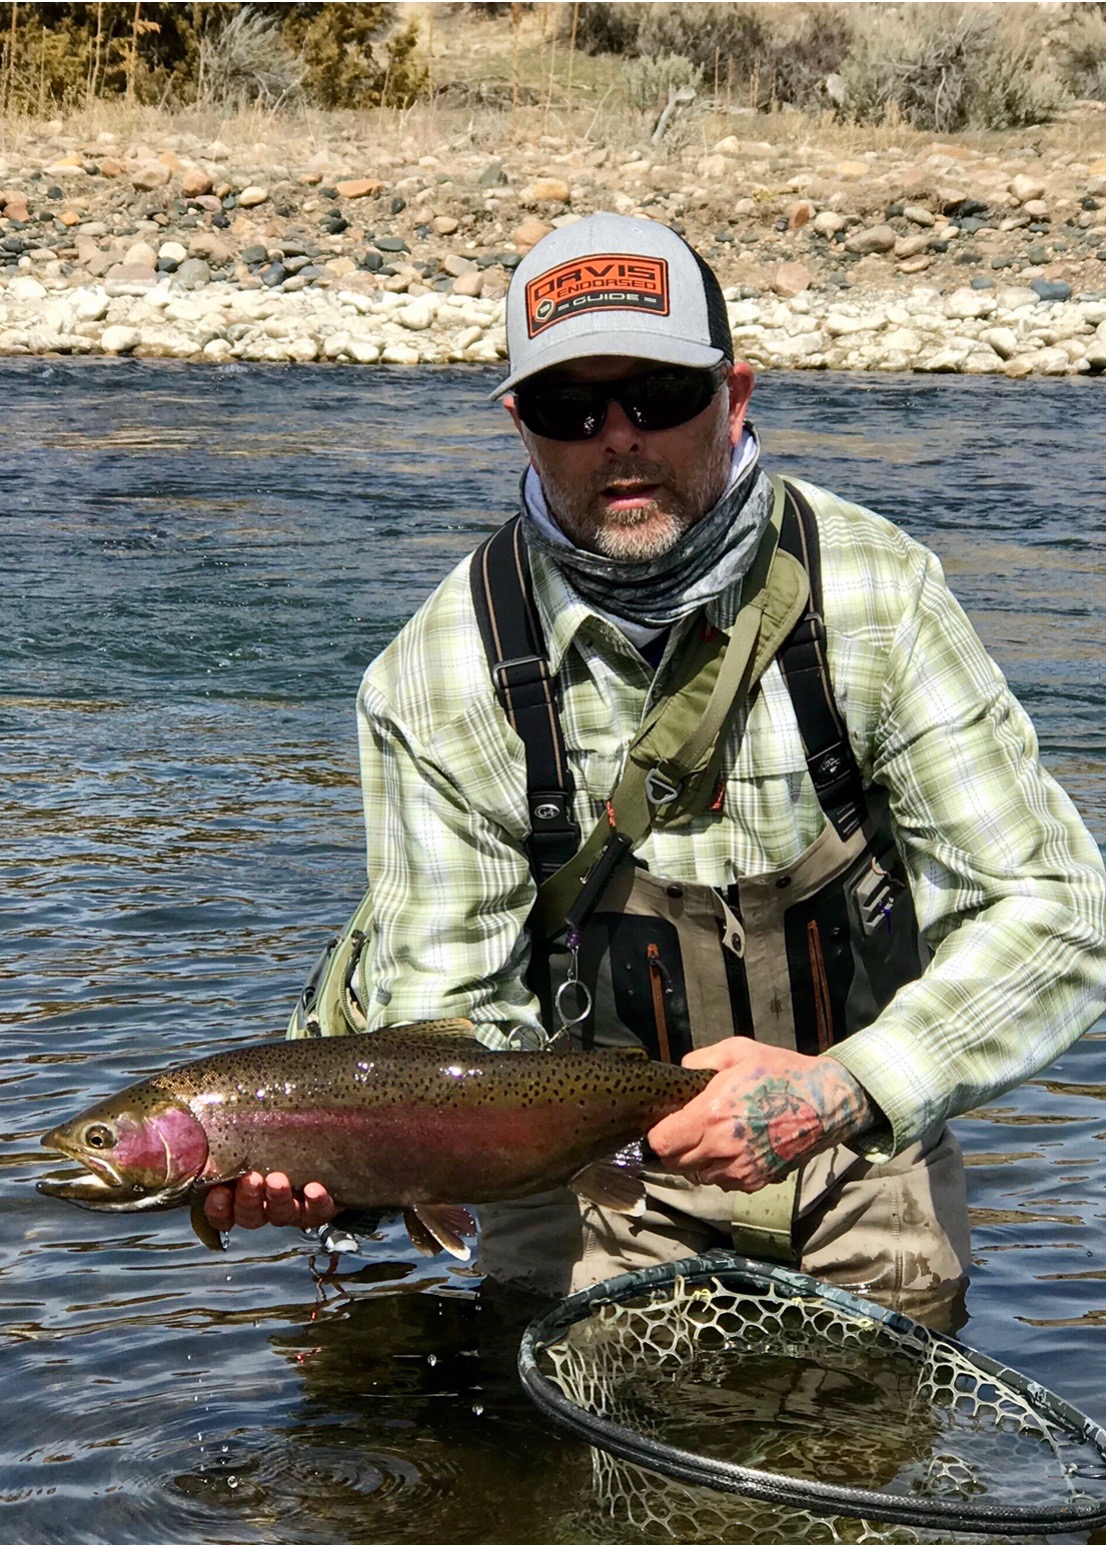 Josh Heney & The Power of Fly Fishing - Angler's Covey